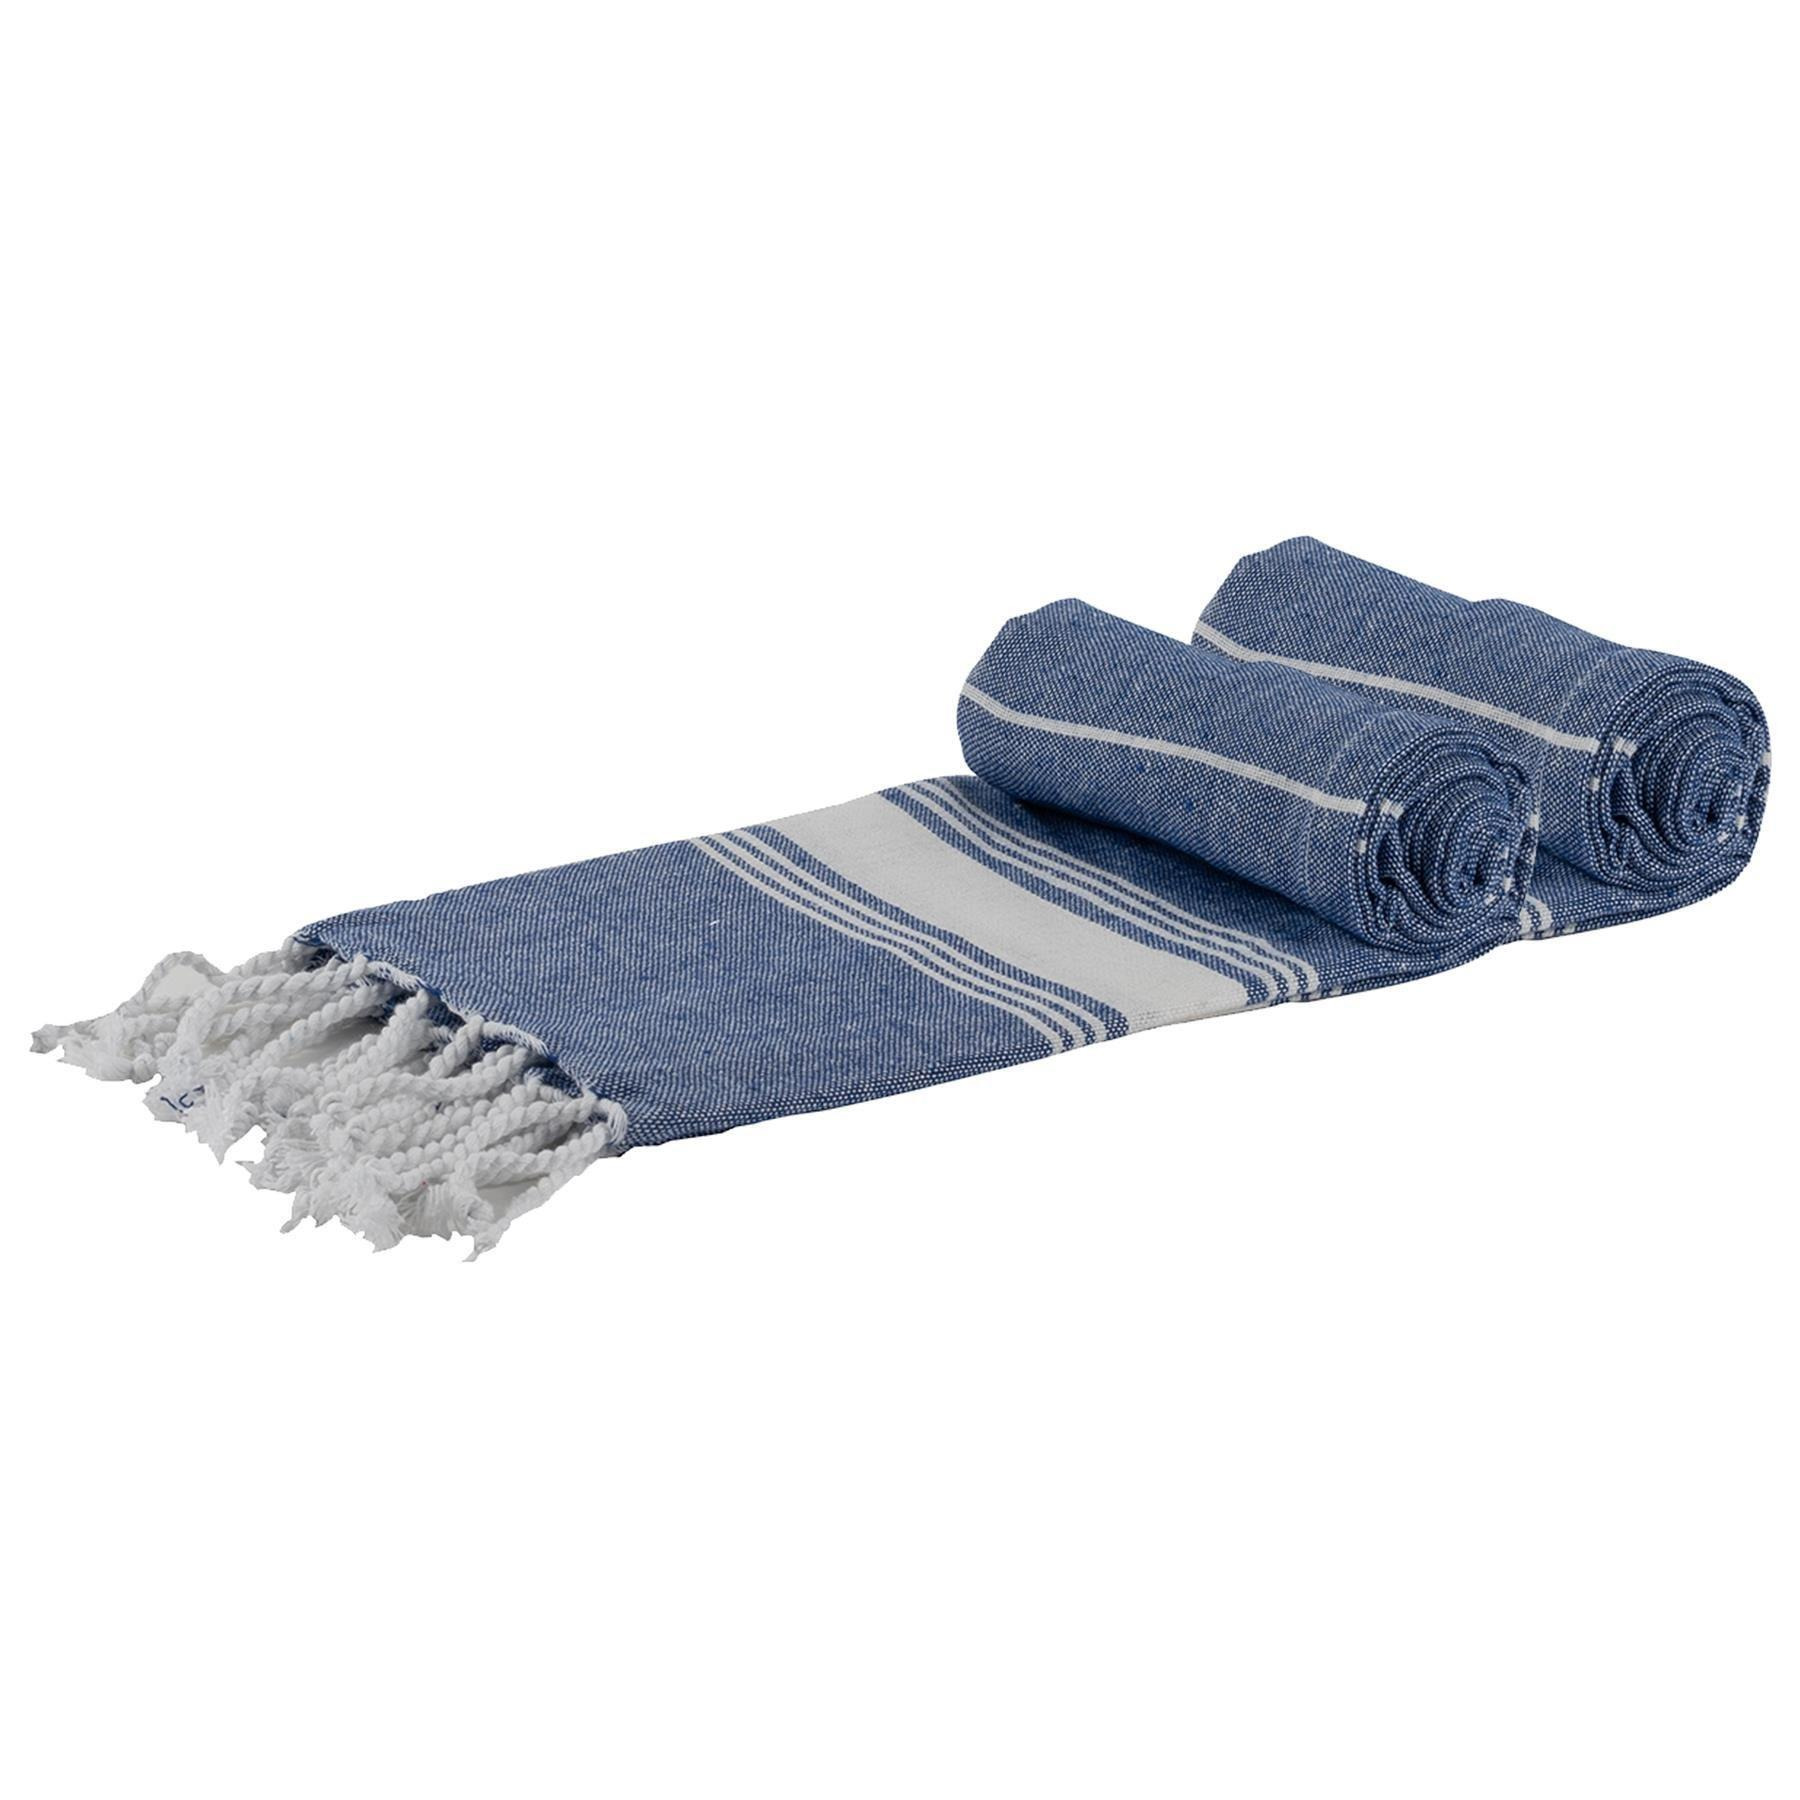 Turkish Cotton Hand Towels 100 x 60cm Pack of 4 - image 1